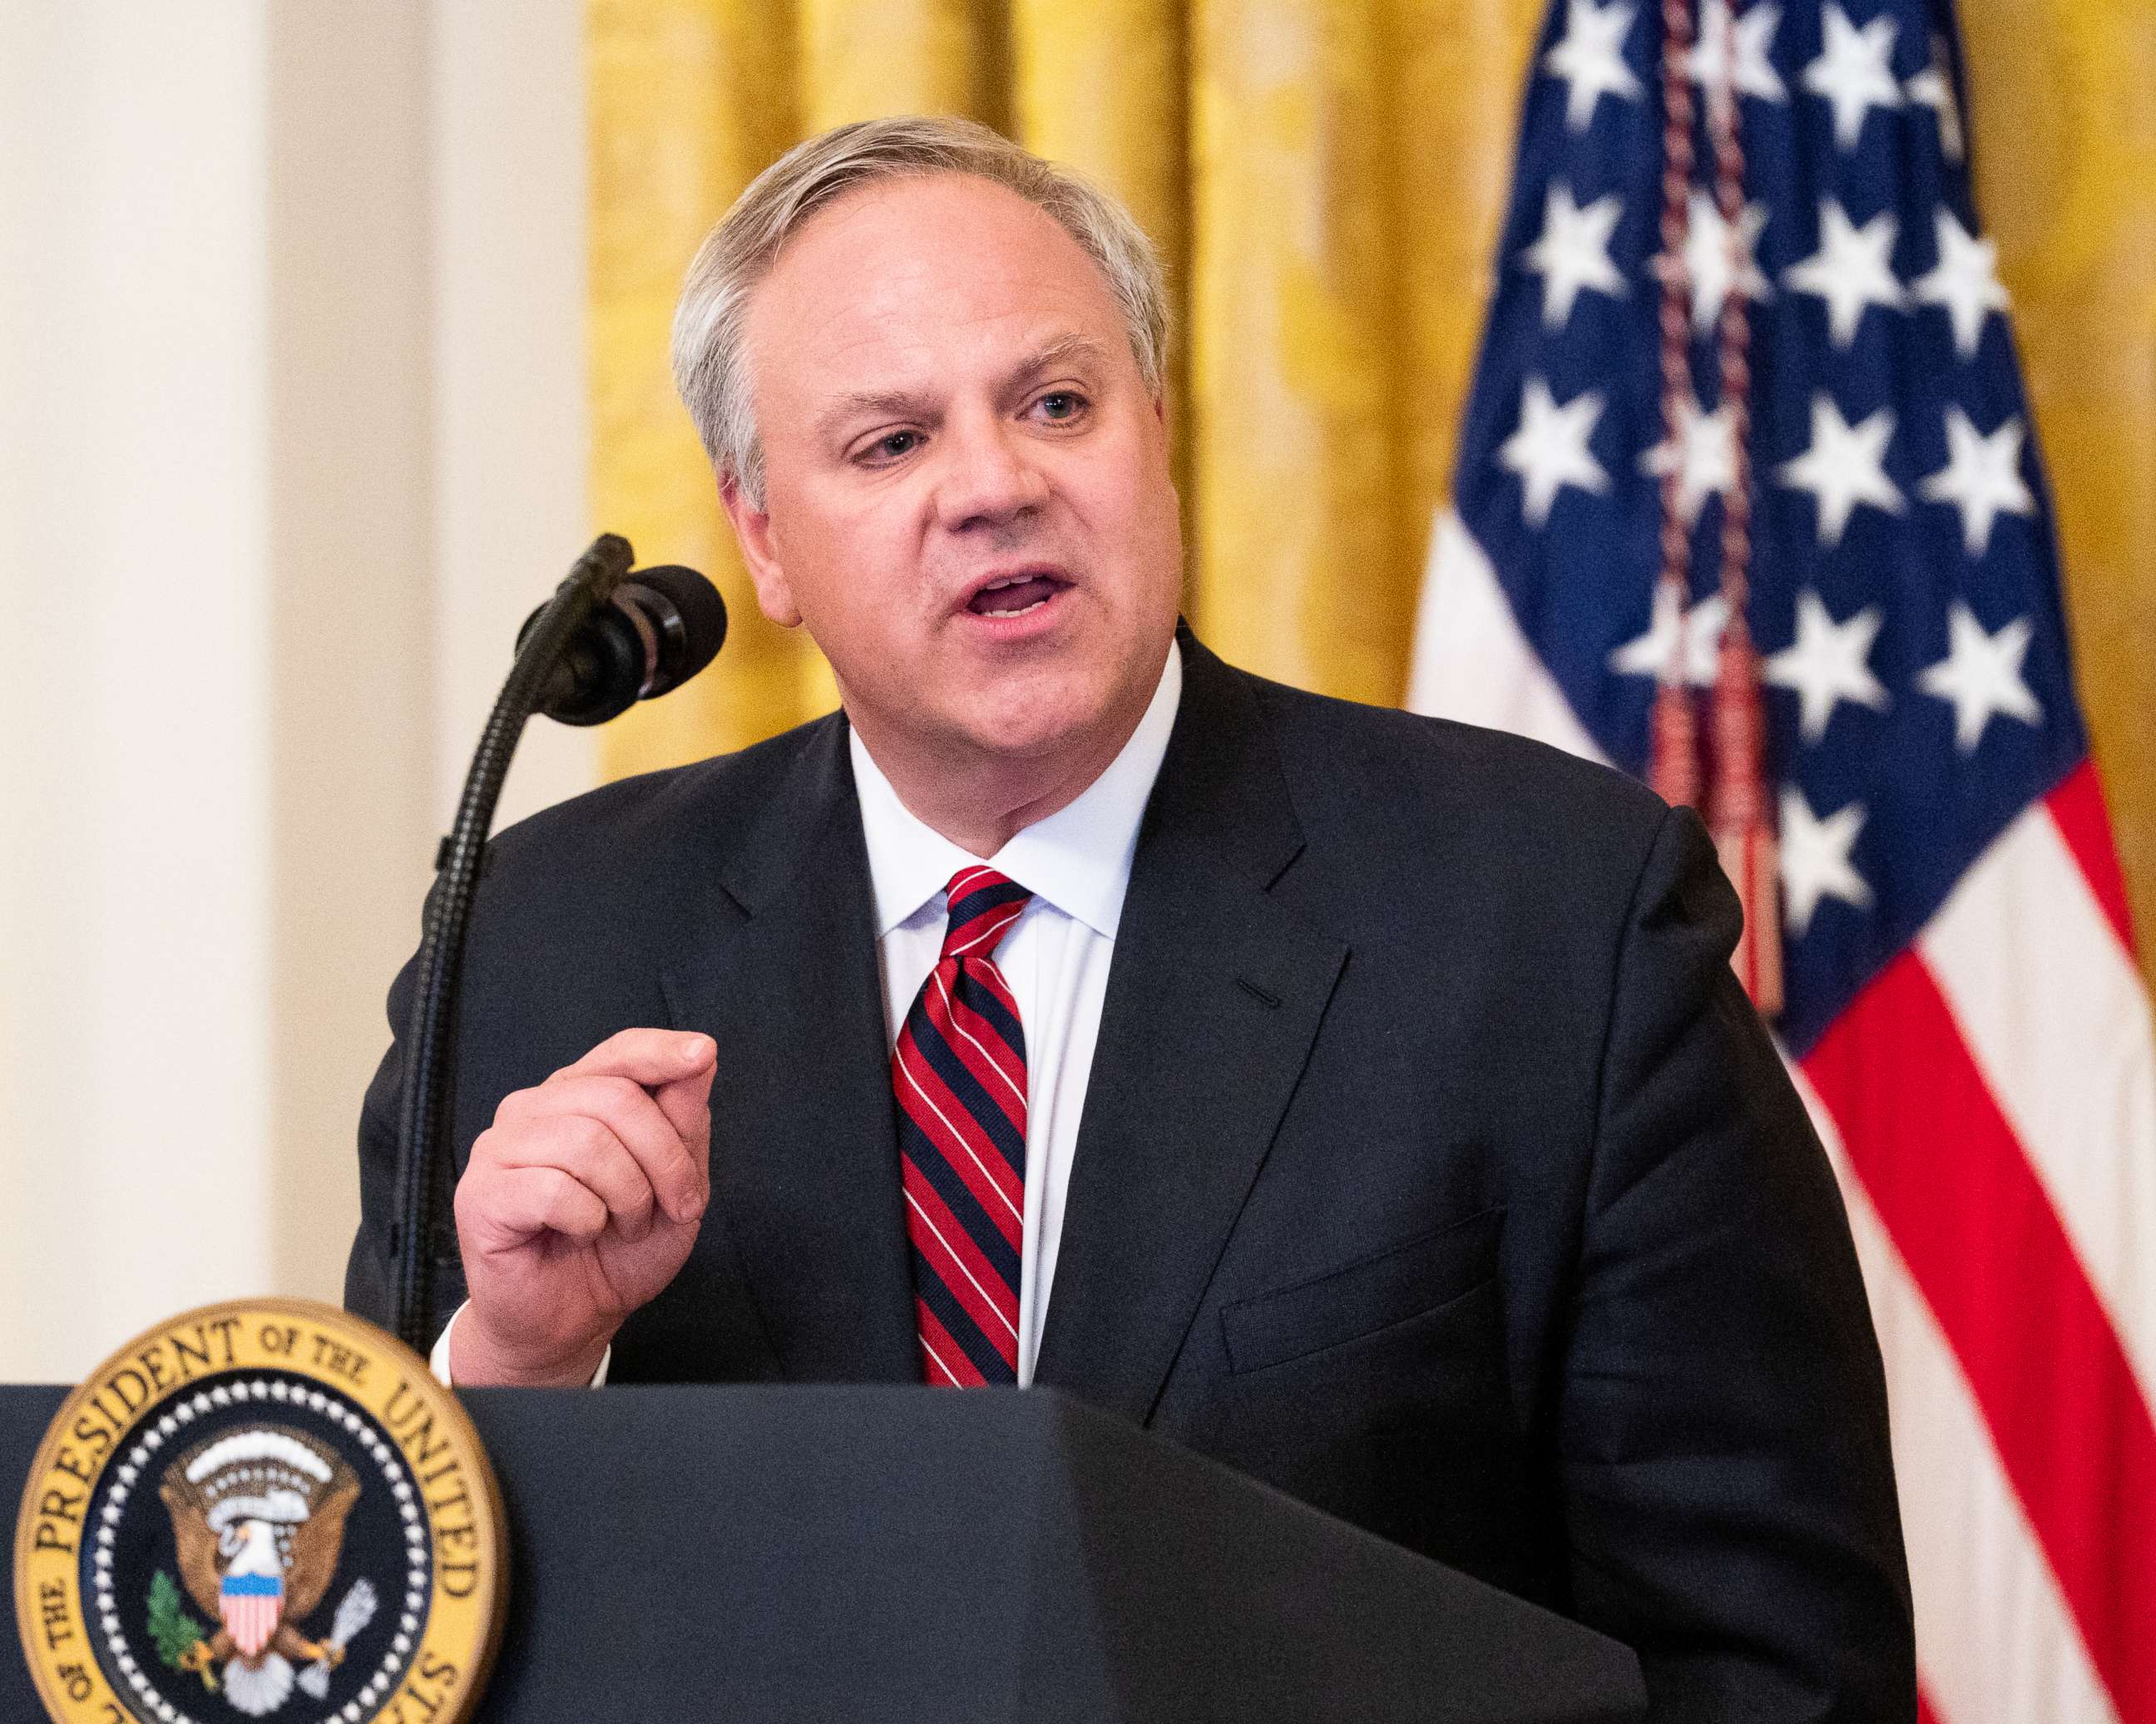 PHOTO: United States Secretary of the Interior David Bernhardt speaking about "America's Environmental Leadership" in the East Room of the White House in Washington, DC.